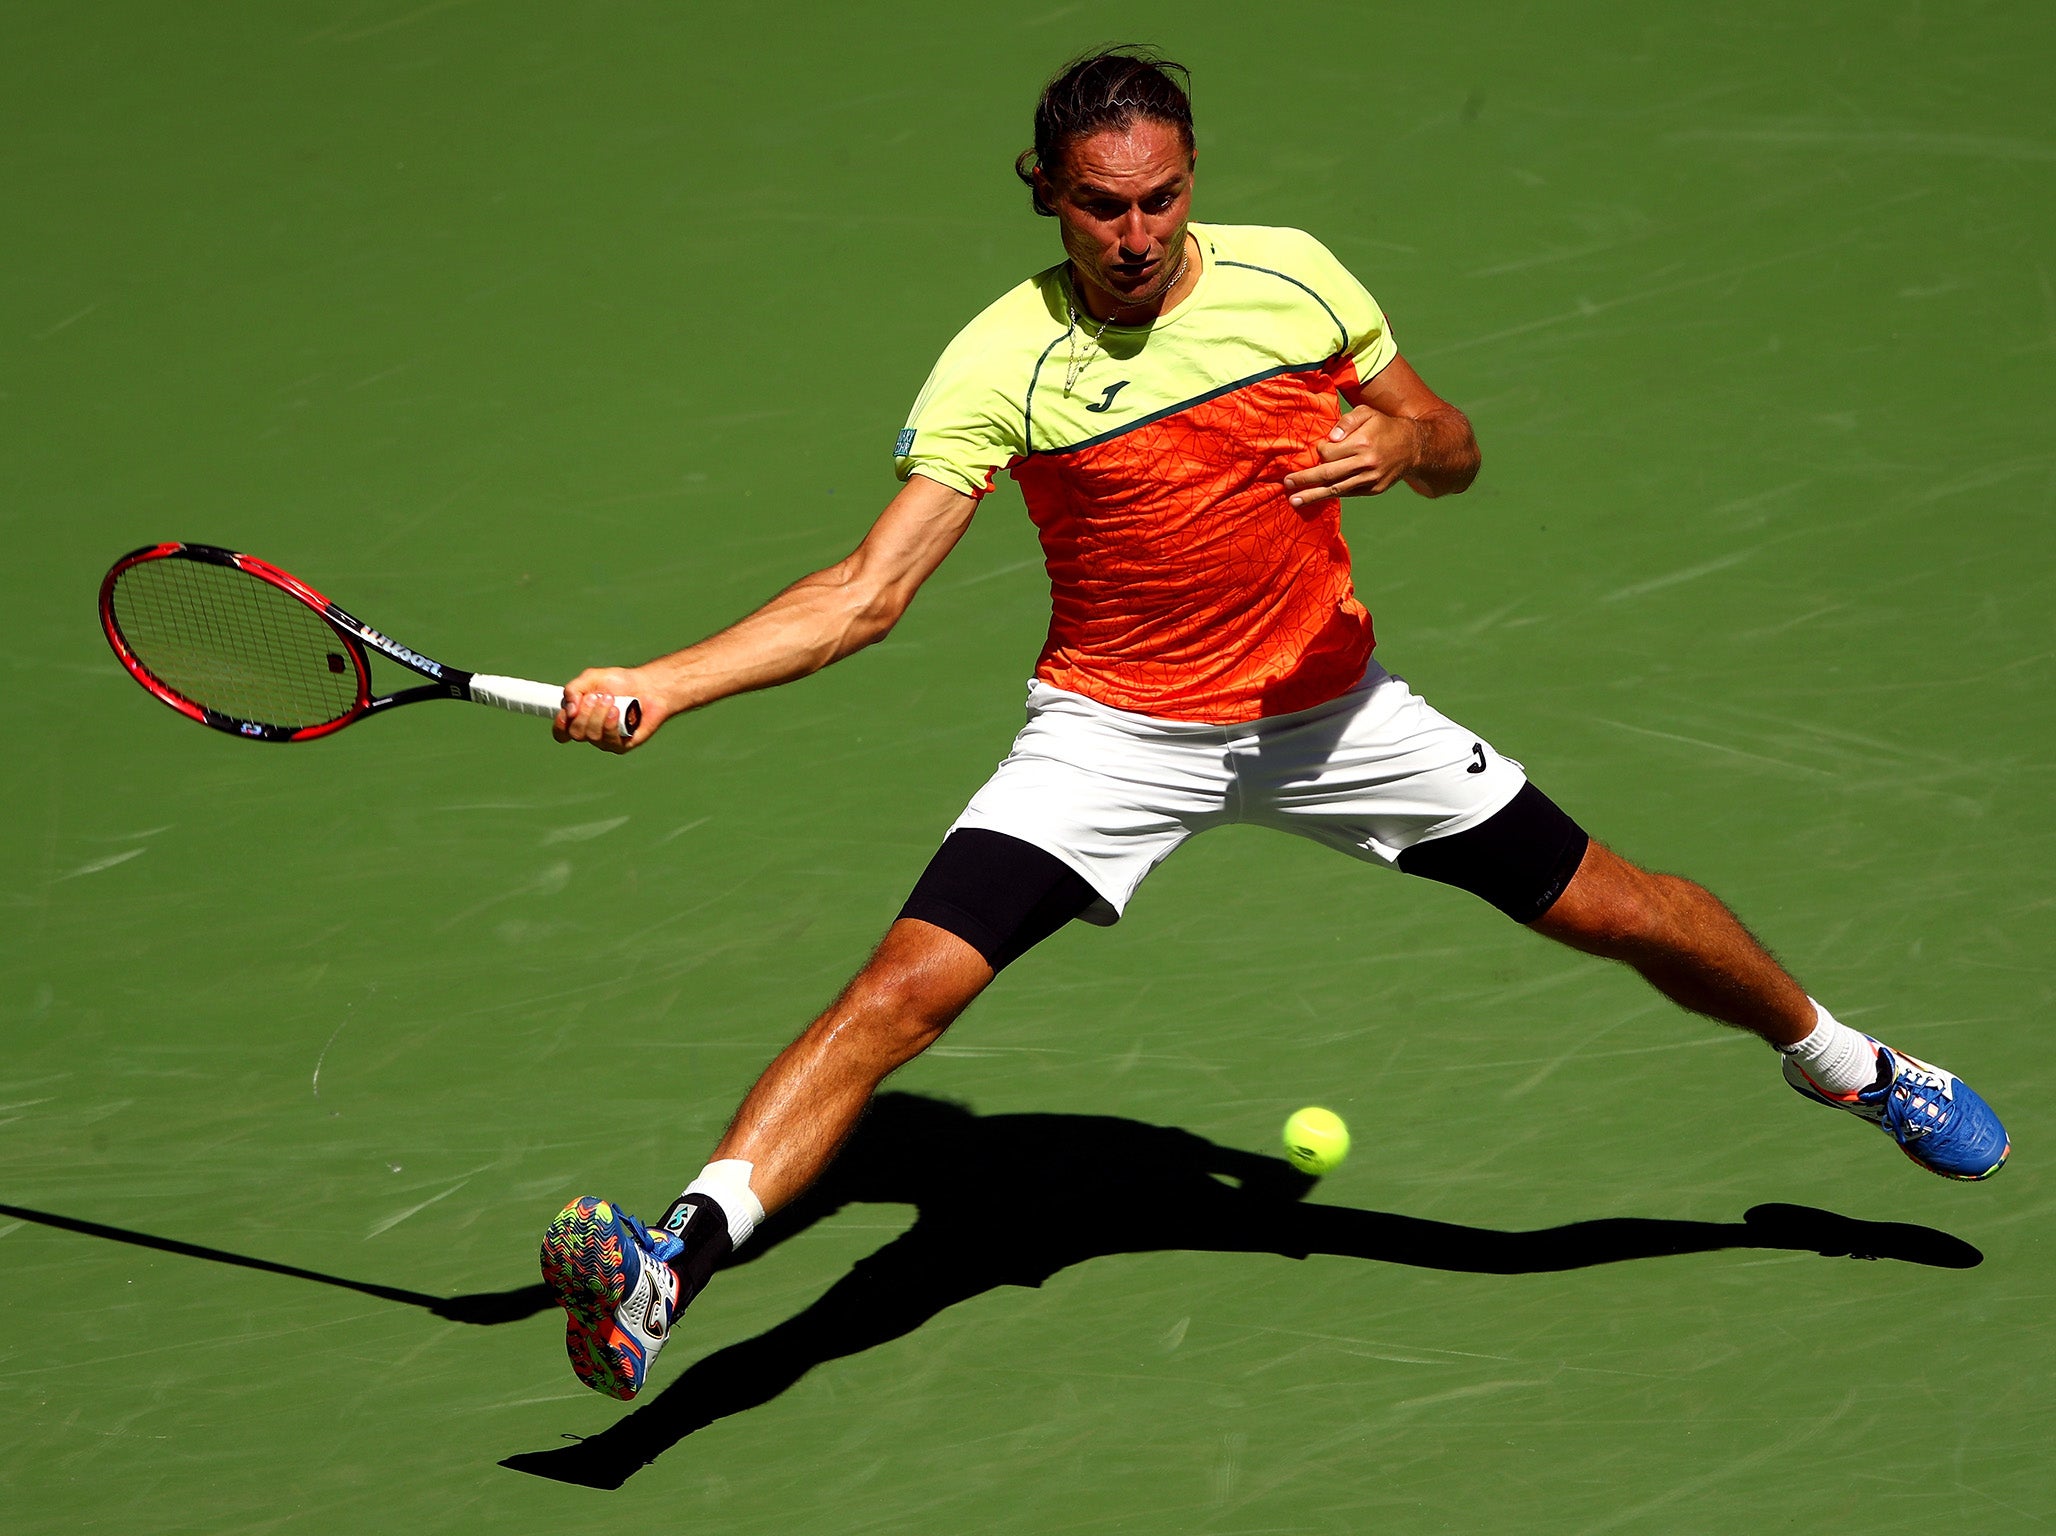 Dolgopolov’s forehand was targeted by the Spaniard